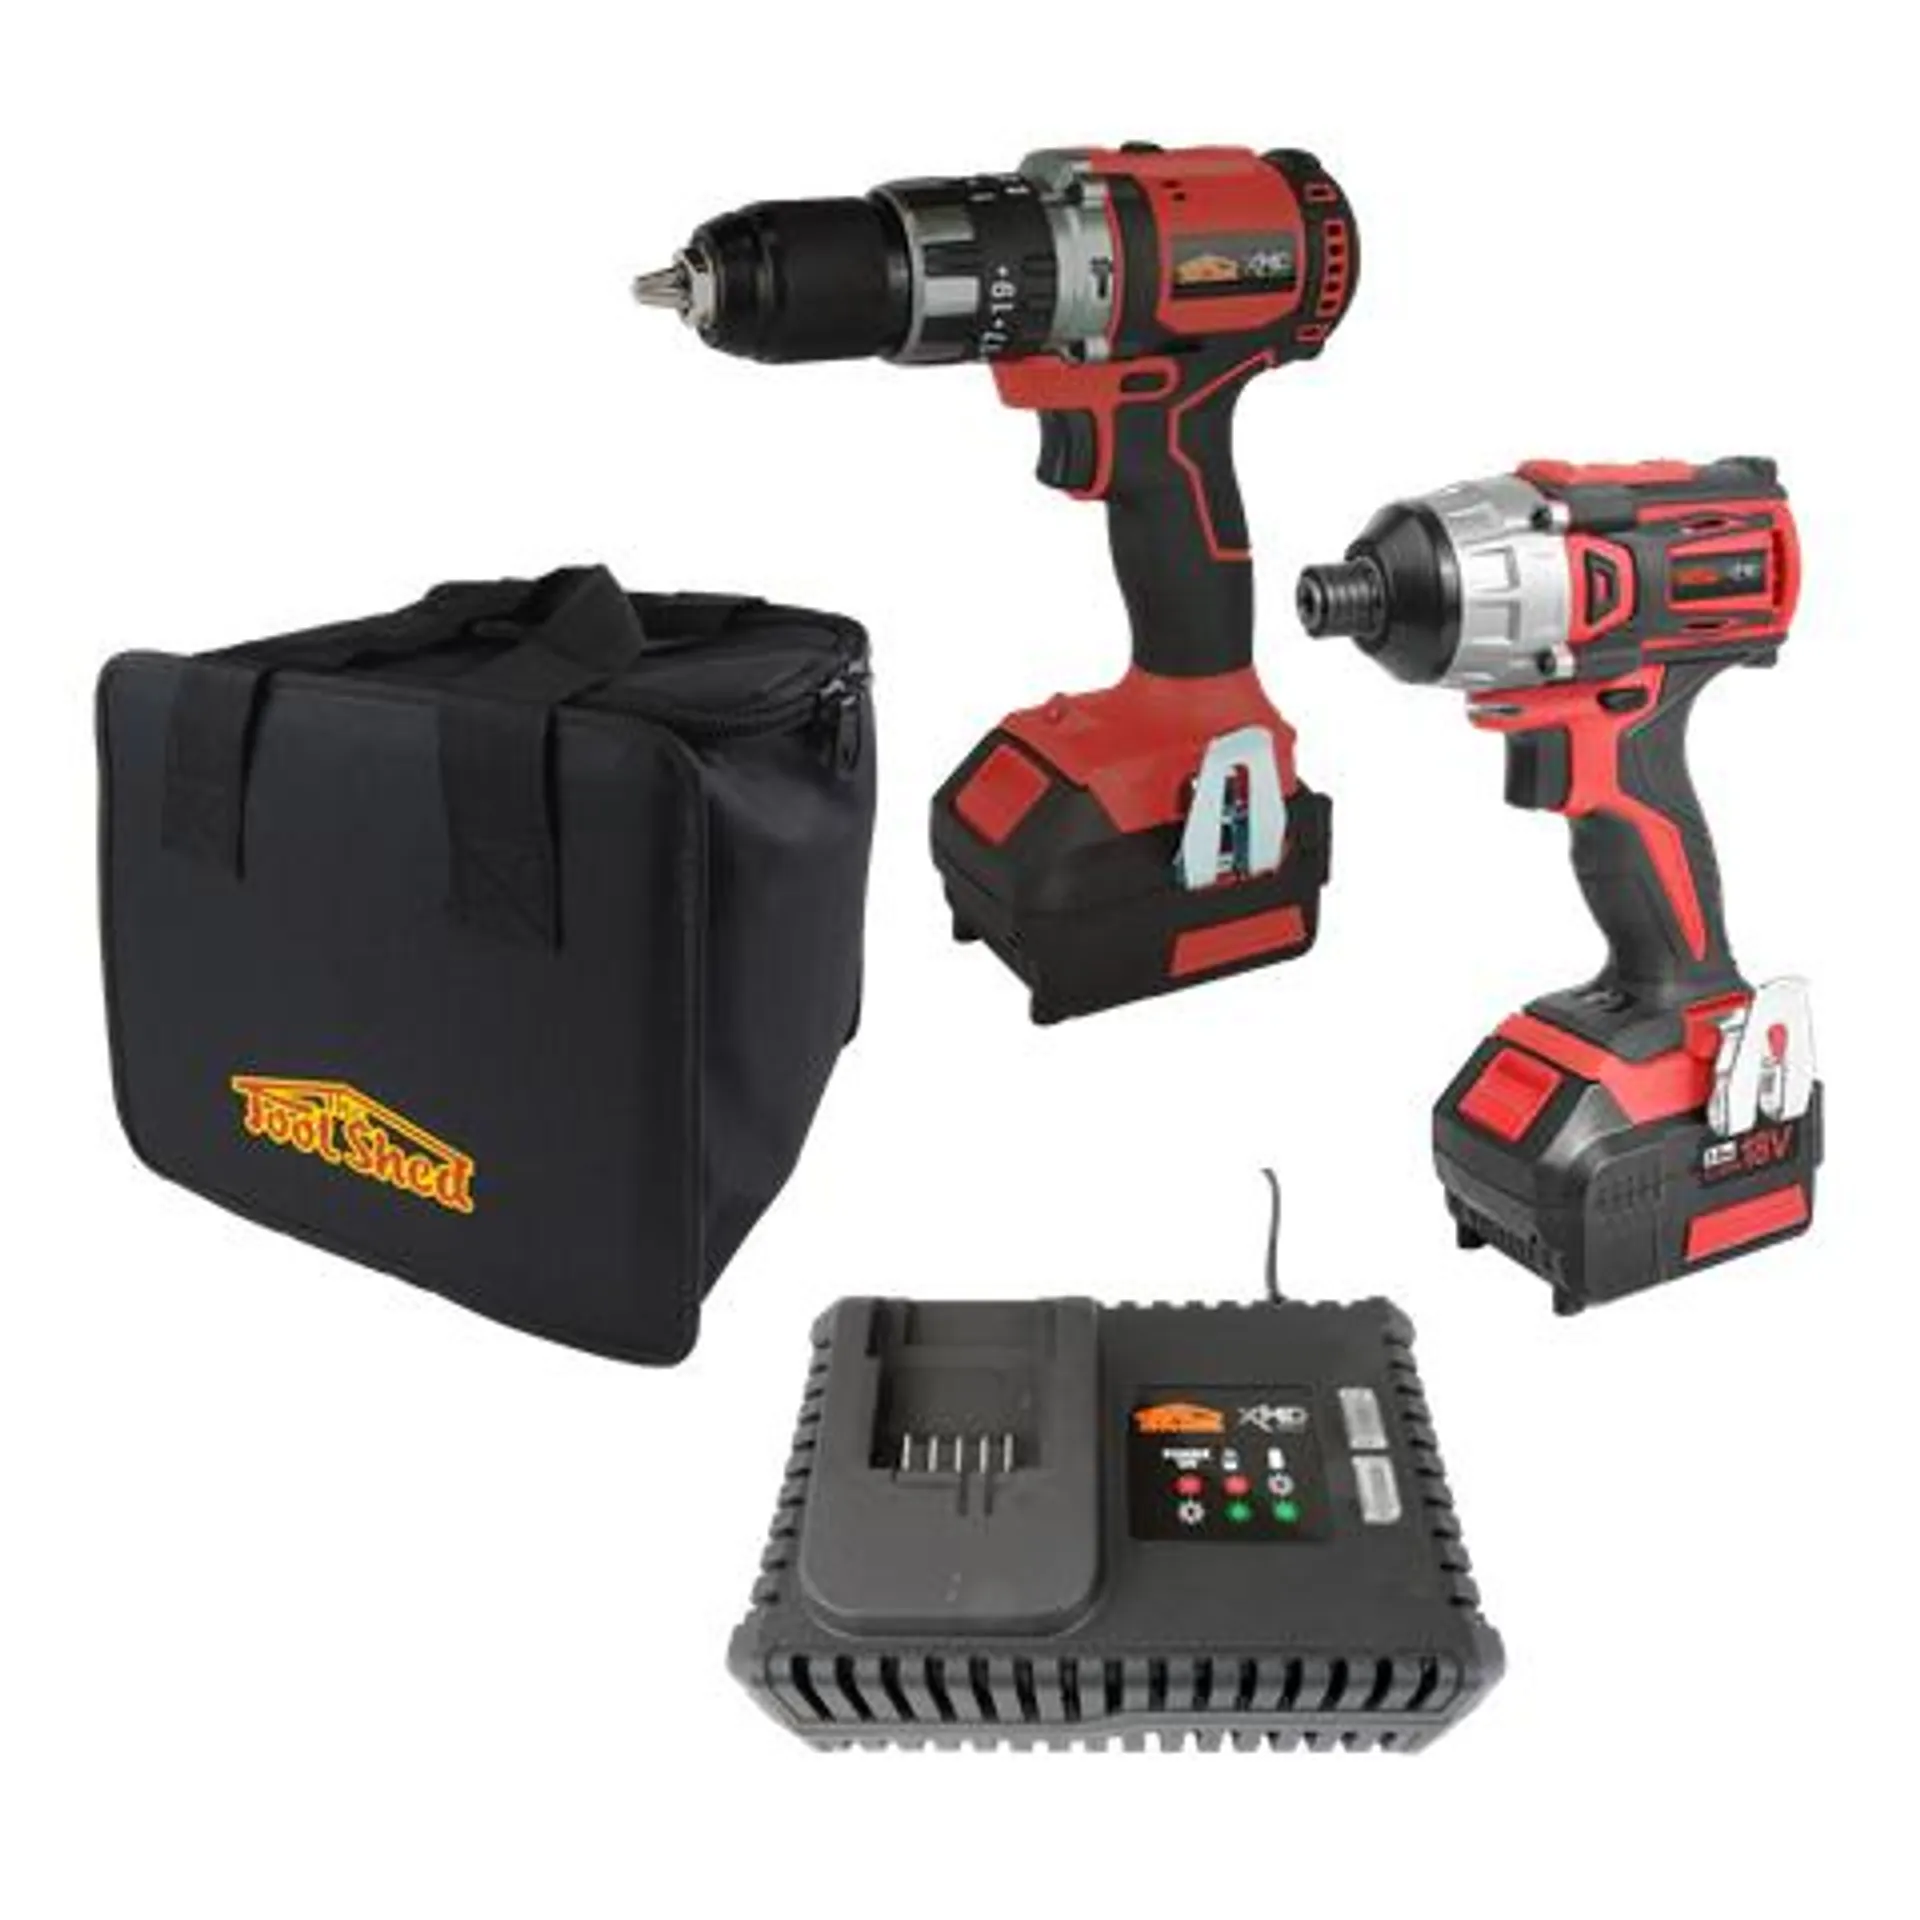 ToolShed XHD Cordless Hammer Drill and Impact Driver Brushless 18V 3Ah